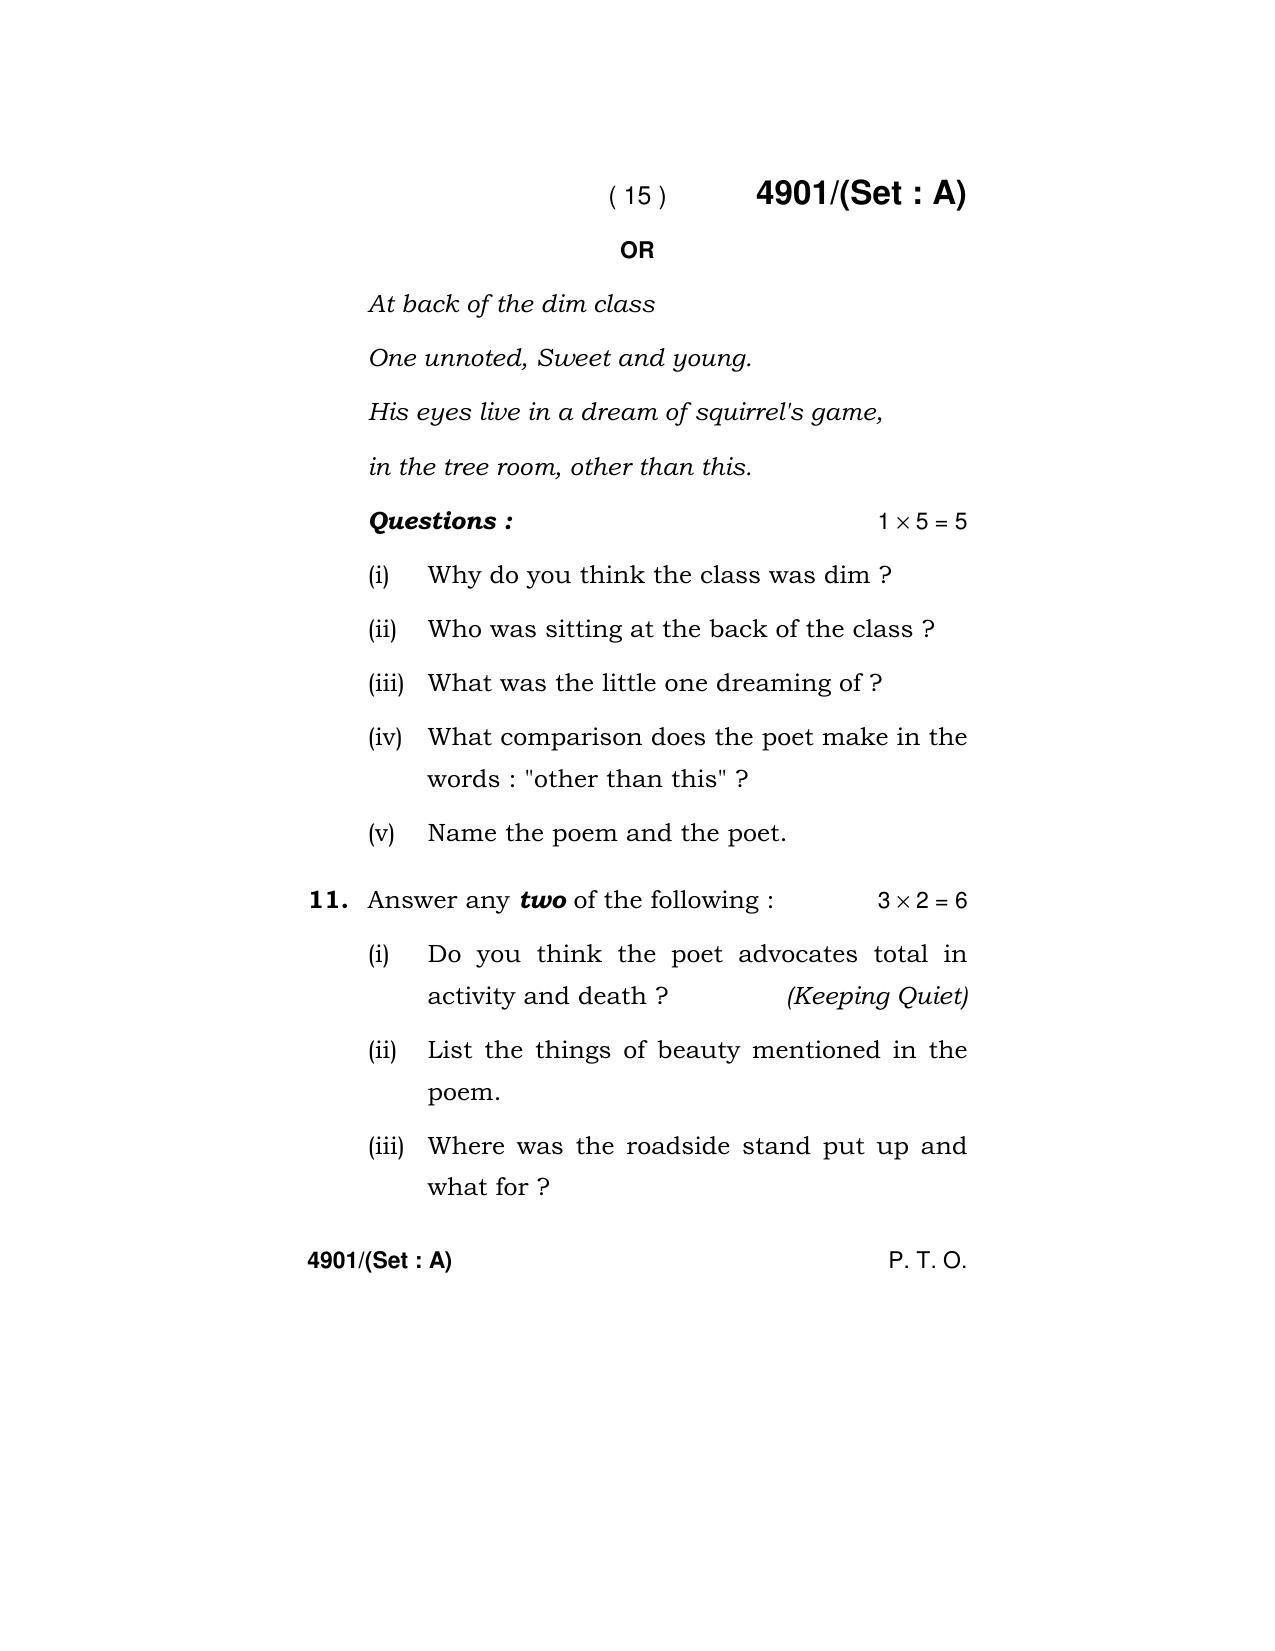 Haryana Board HBSE Class 12 English Core 2020 Question Paper - Page 15